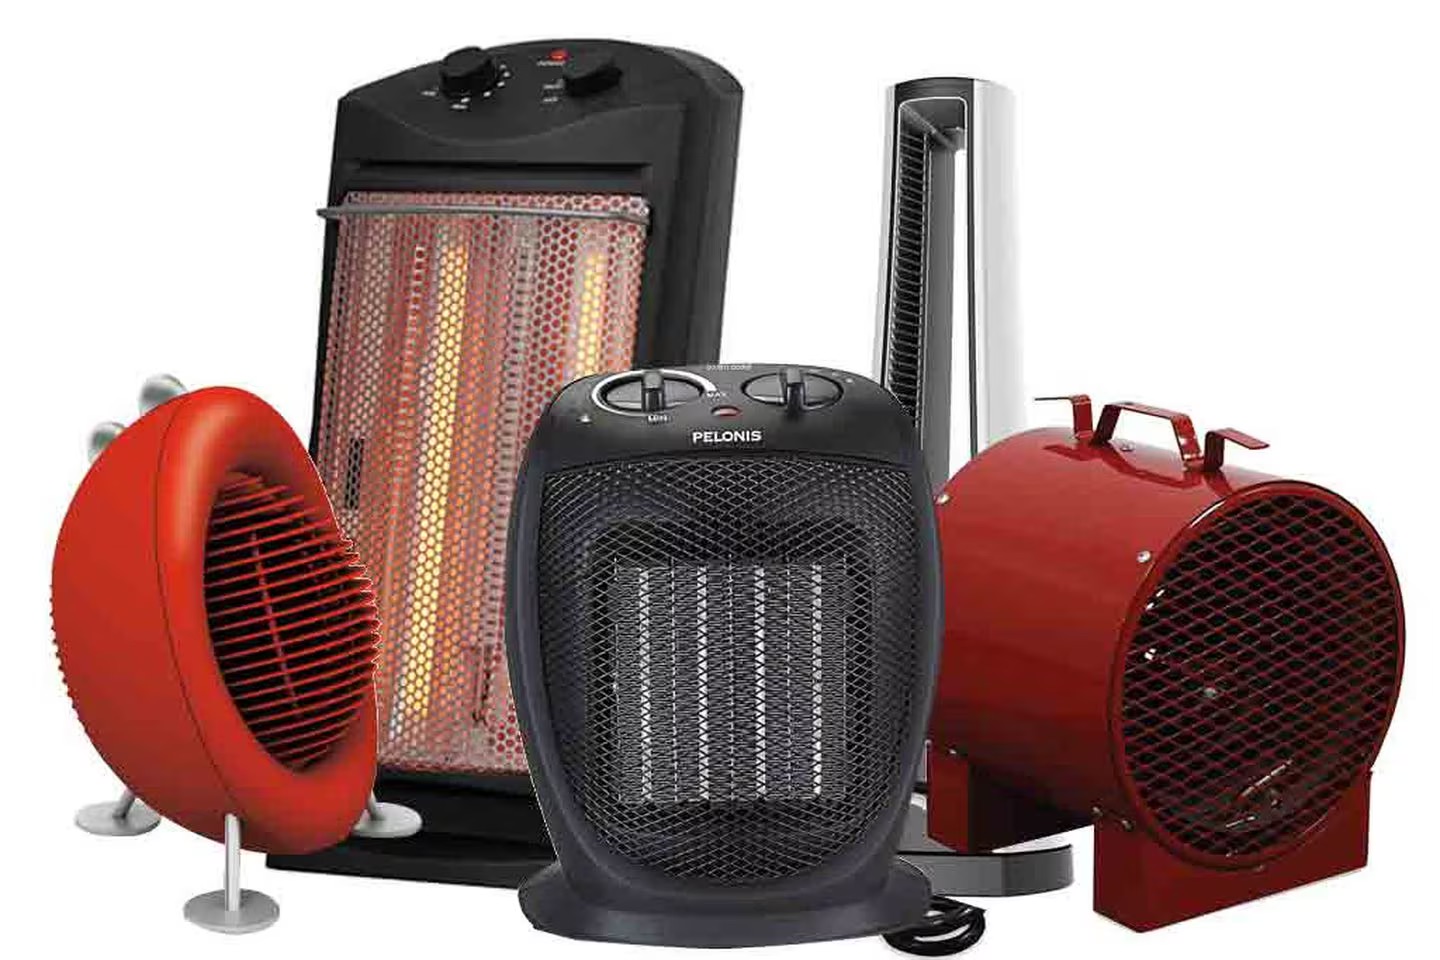 Which Space Heater Is The Best?